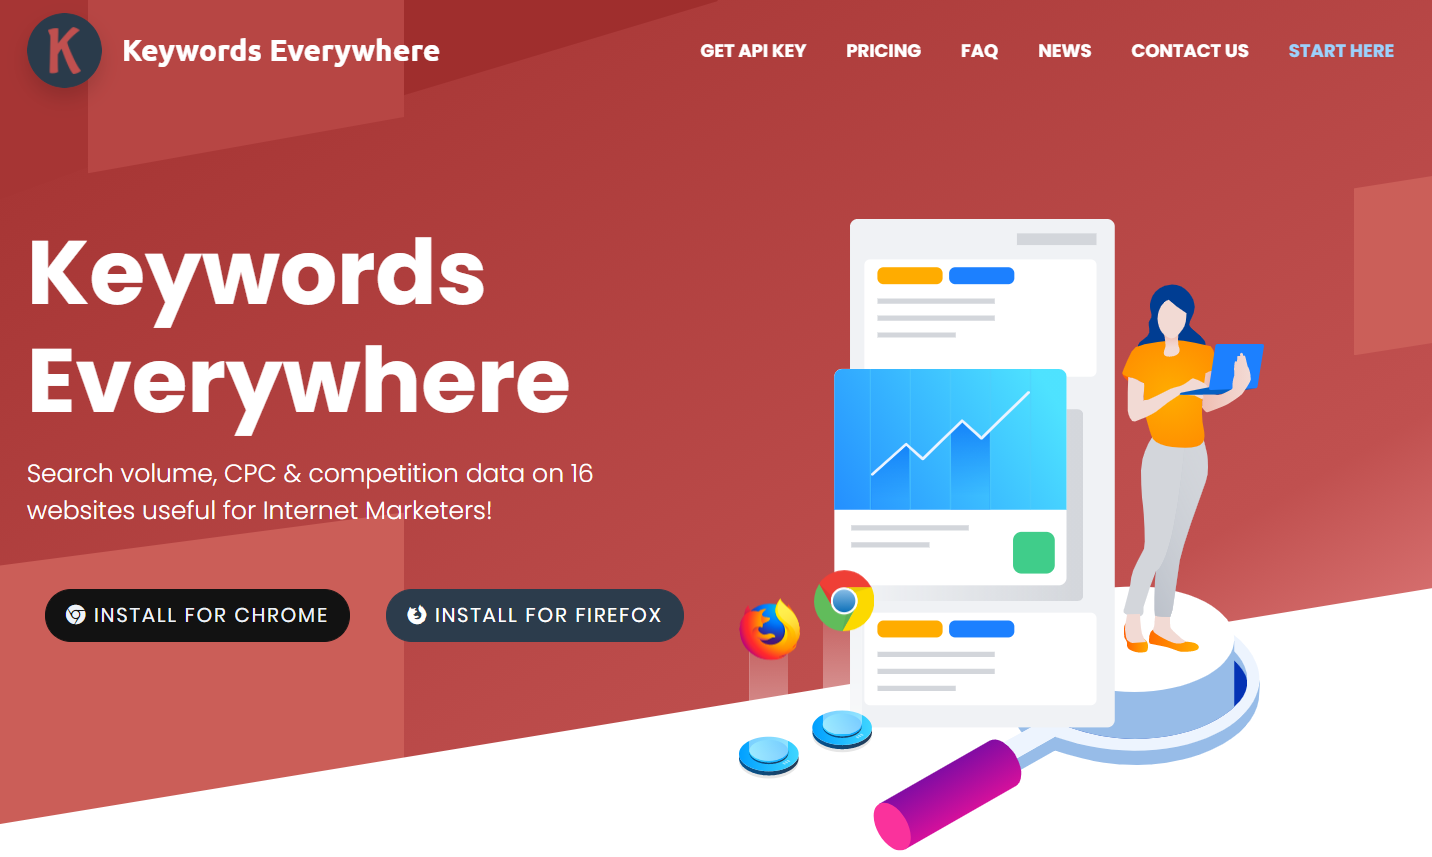 Keywords Everywhere is a great free tool